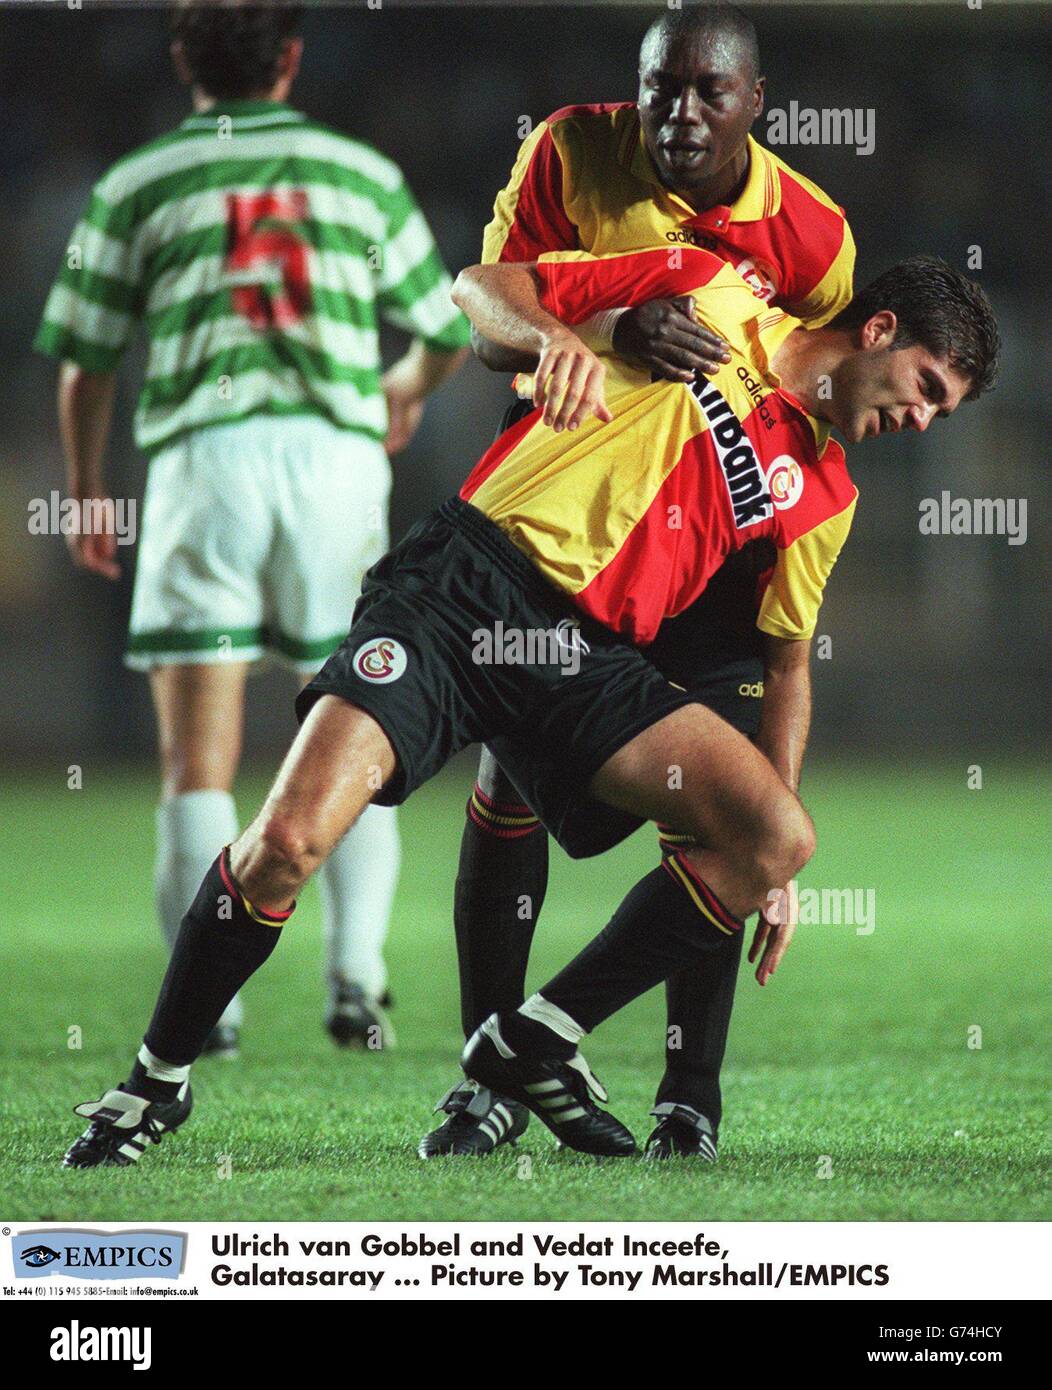 International Soccer-Galatasaray v Constructorul Chisinau. Ulrich van  Gobbel and Vedat Inceefe, Galatasaray ... Picture by Tony Marshall/EMPICS  Stock Photo - Alamy